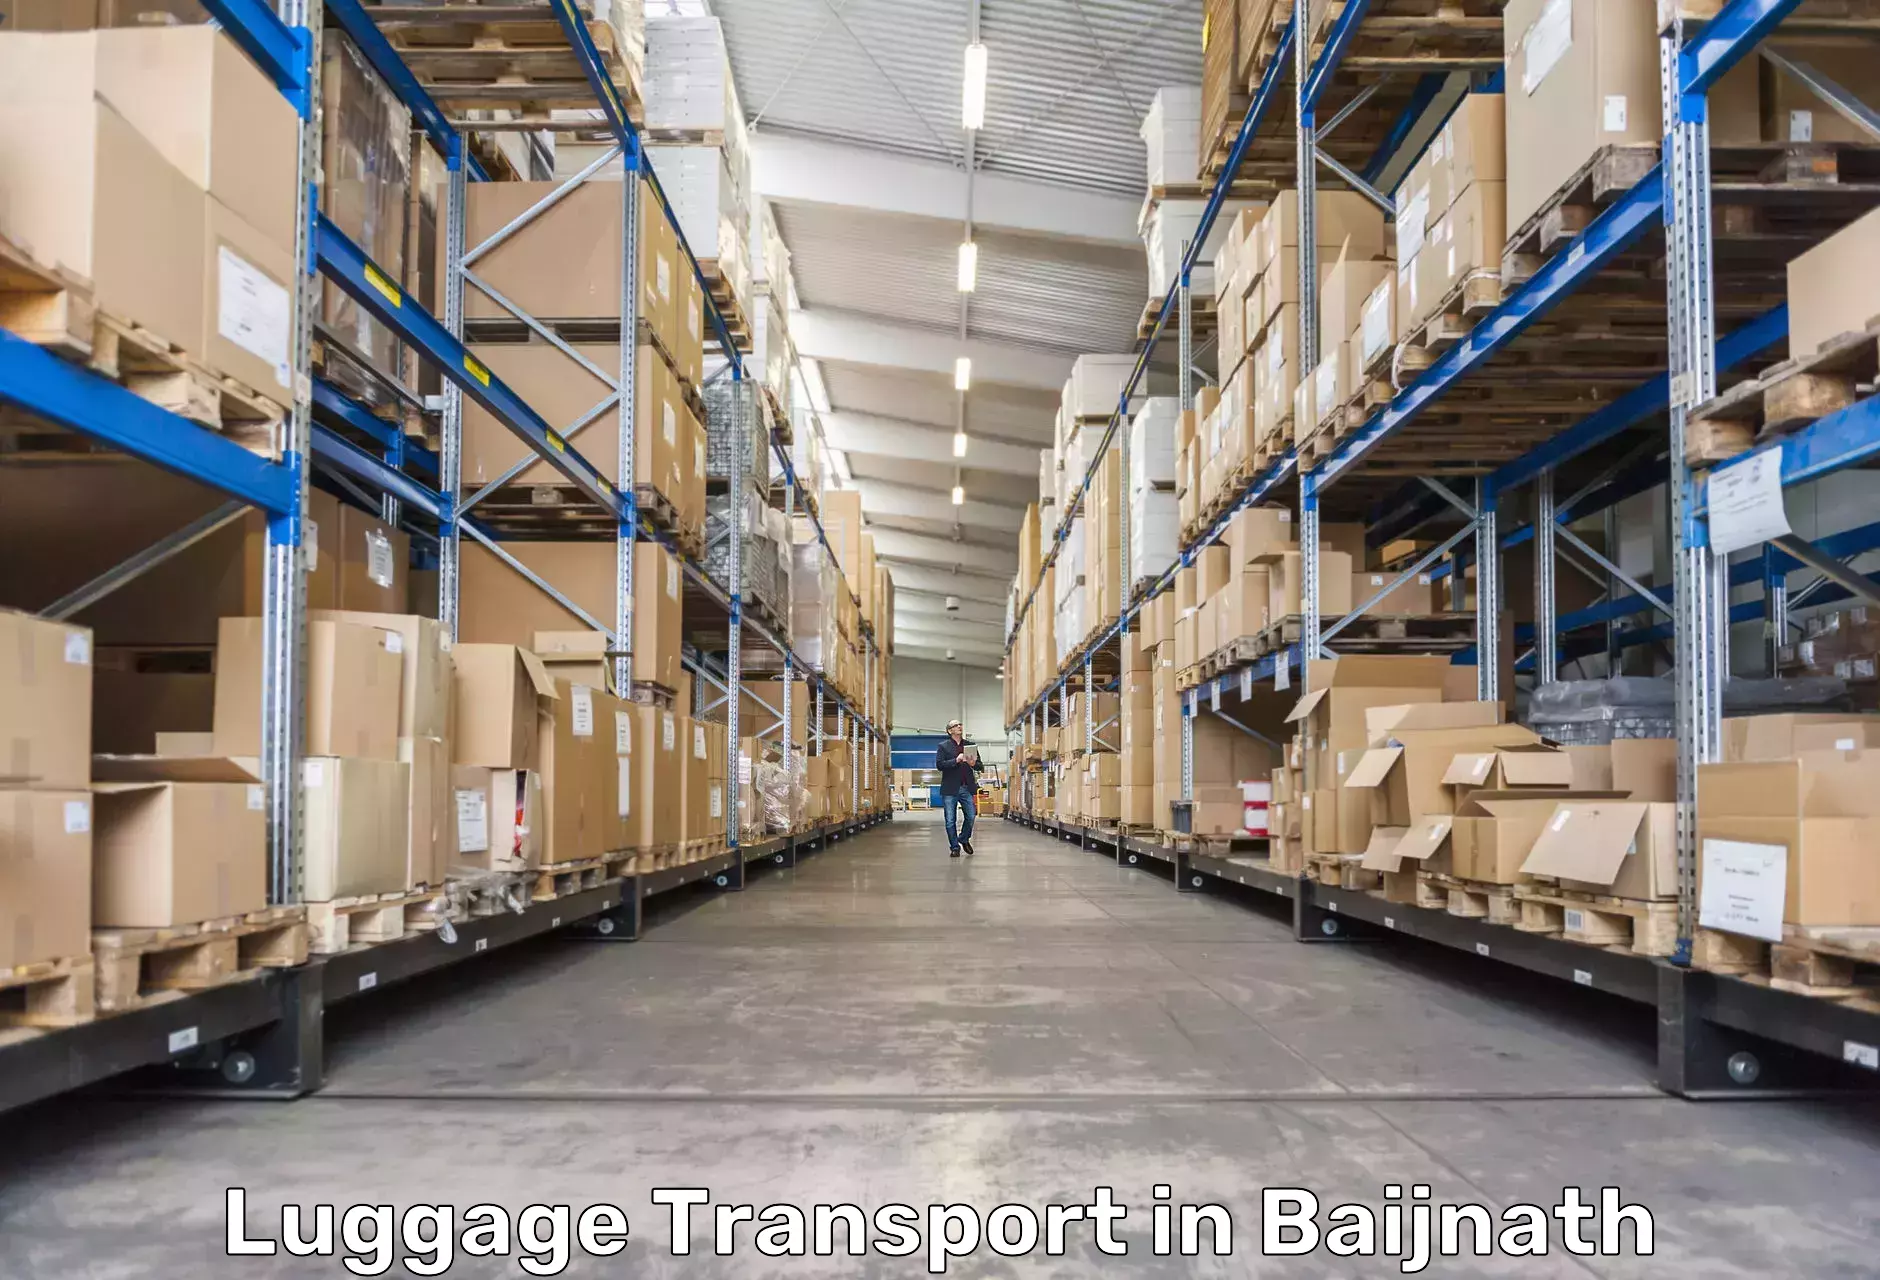 Luggage transport consulting in Baijnath